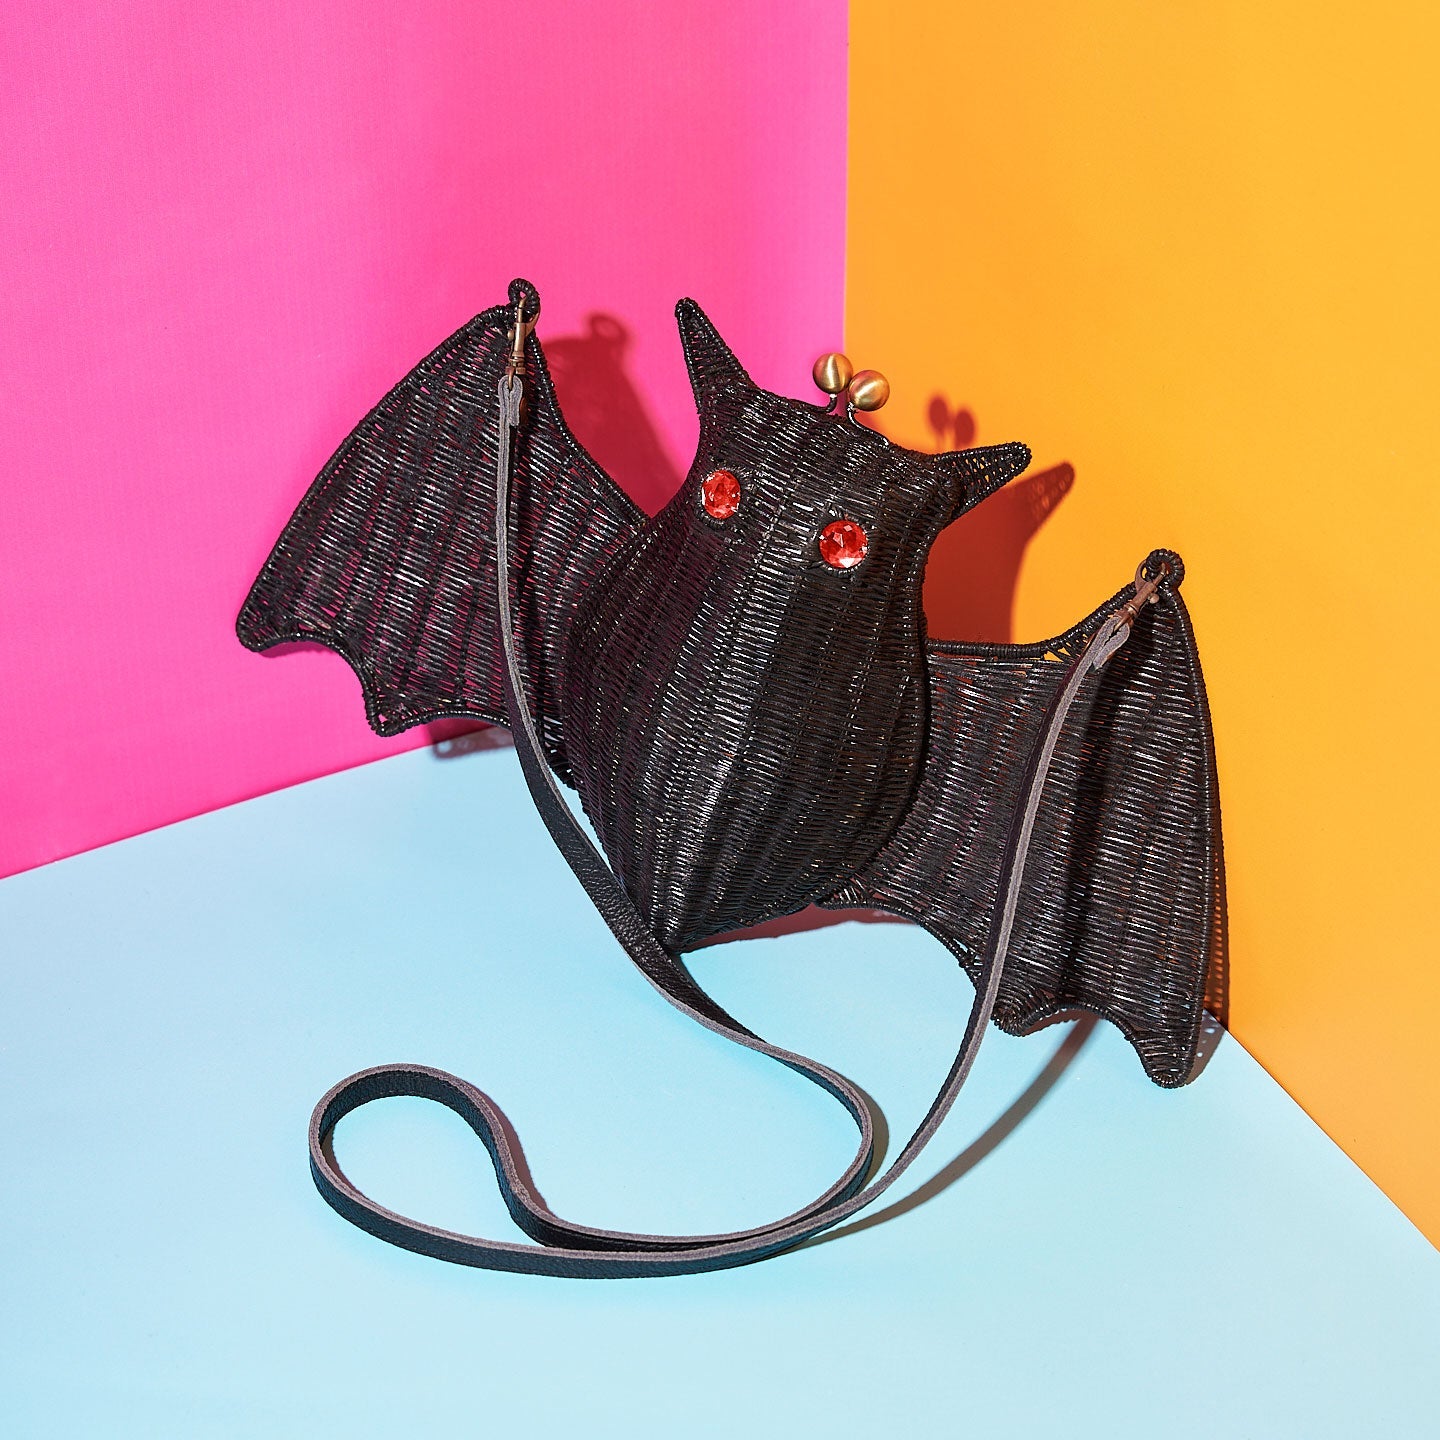 Wicker Darling's Battie Page the red-eyed bat purse on a colourful background